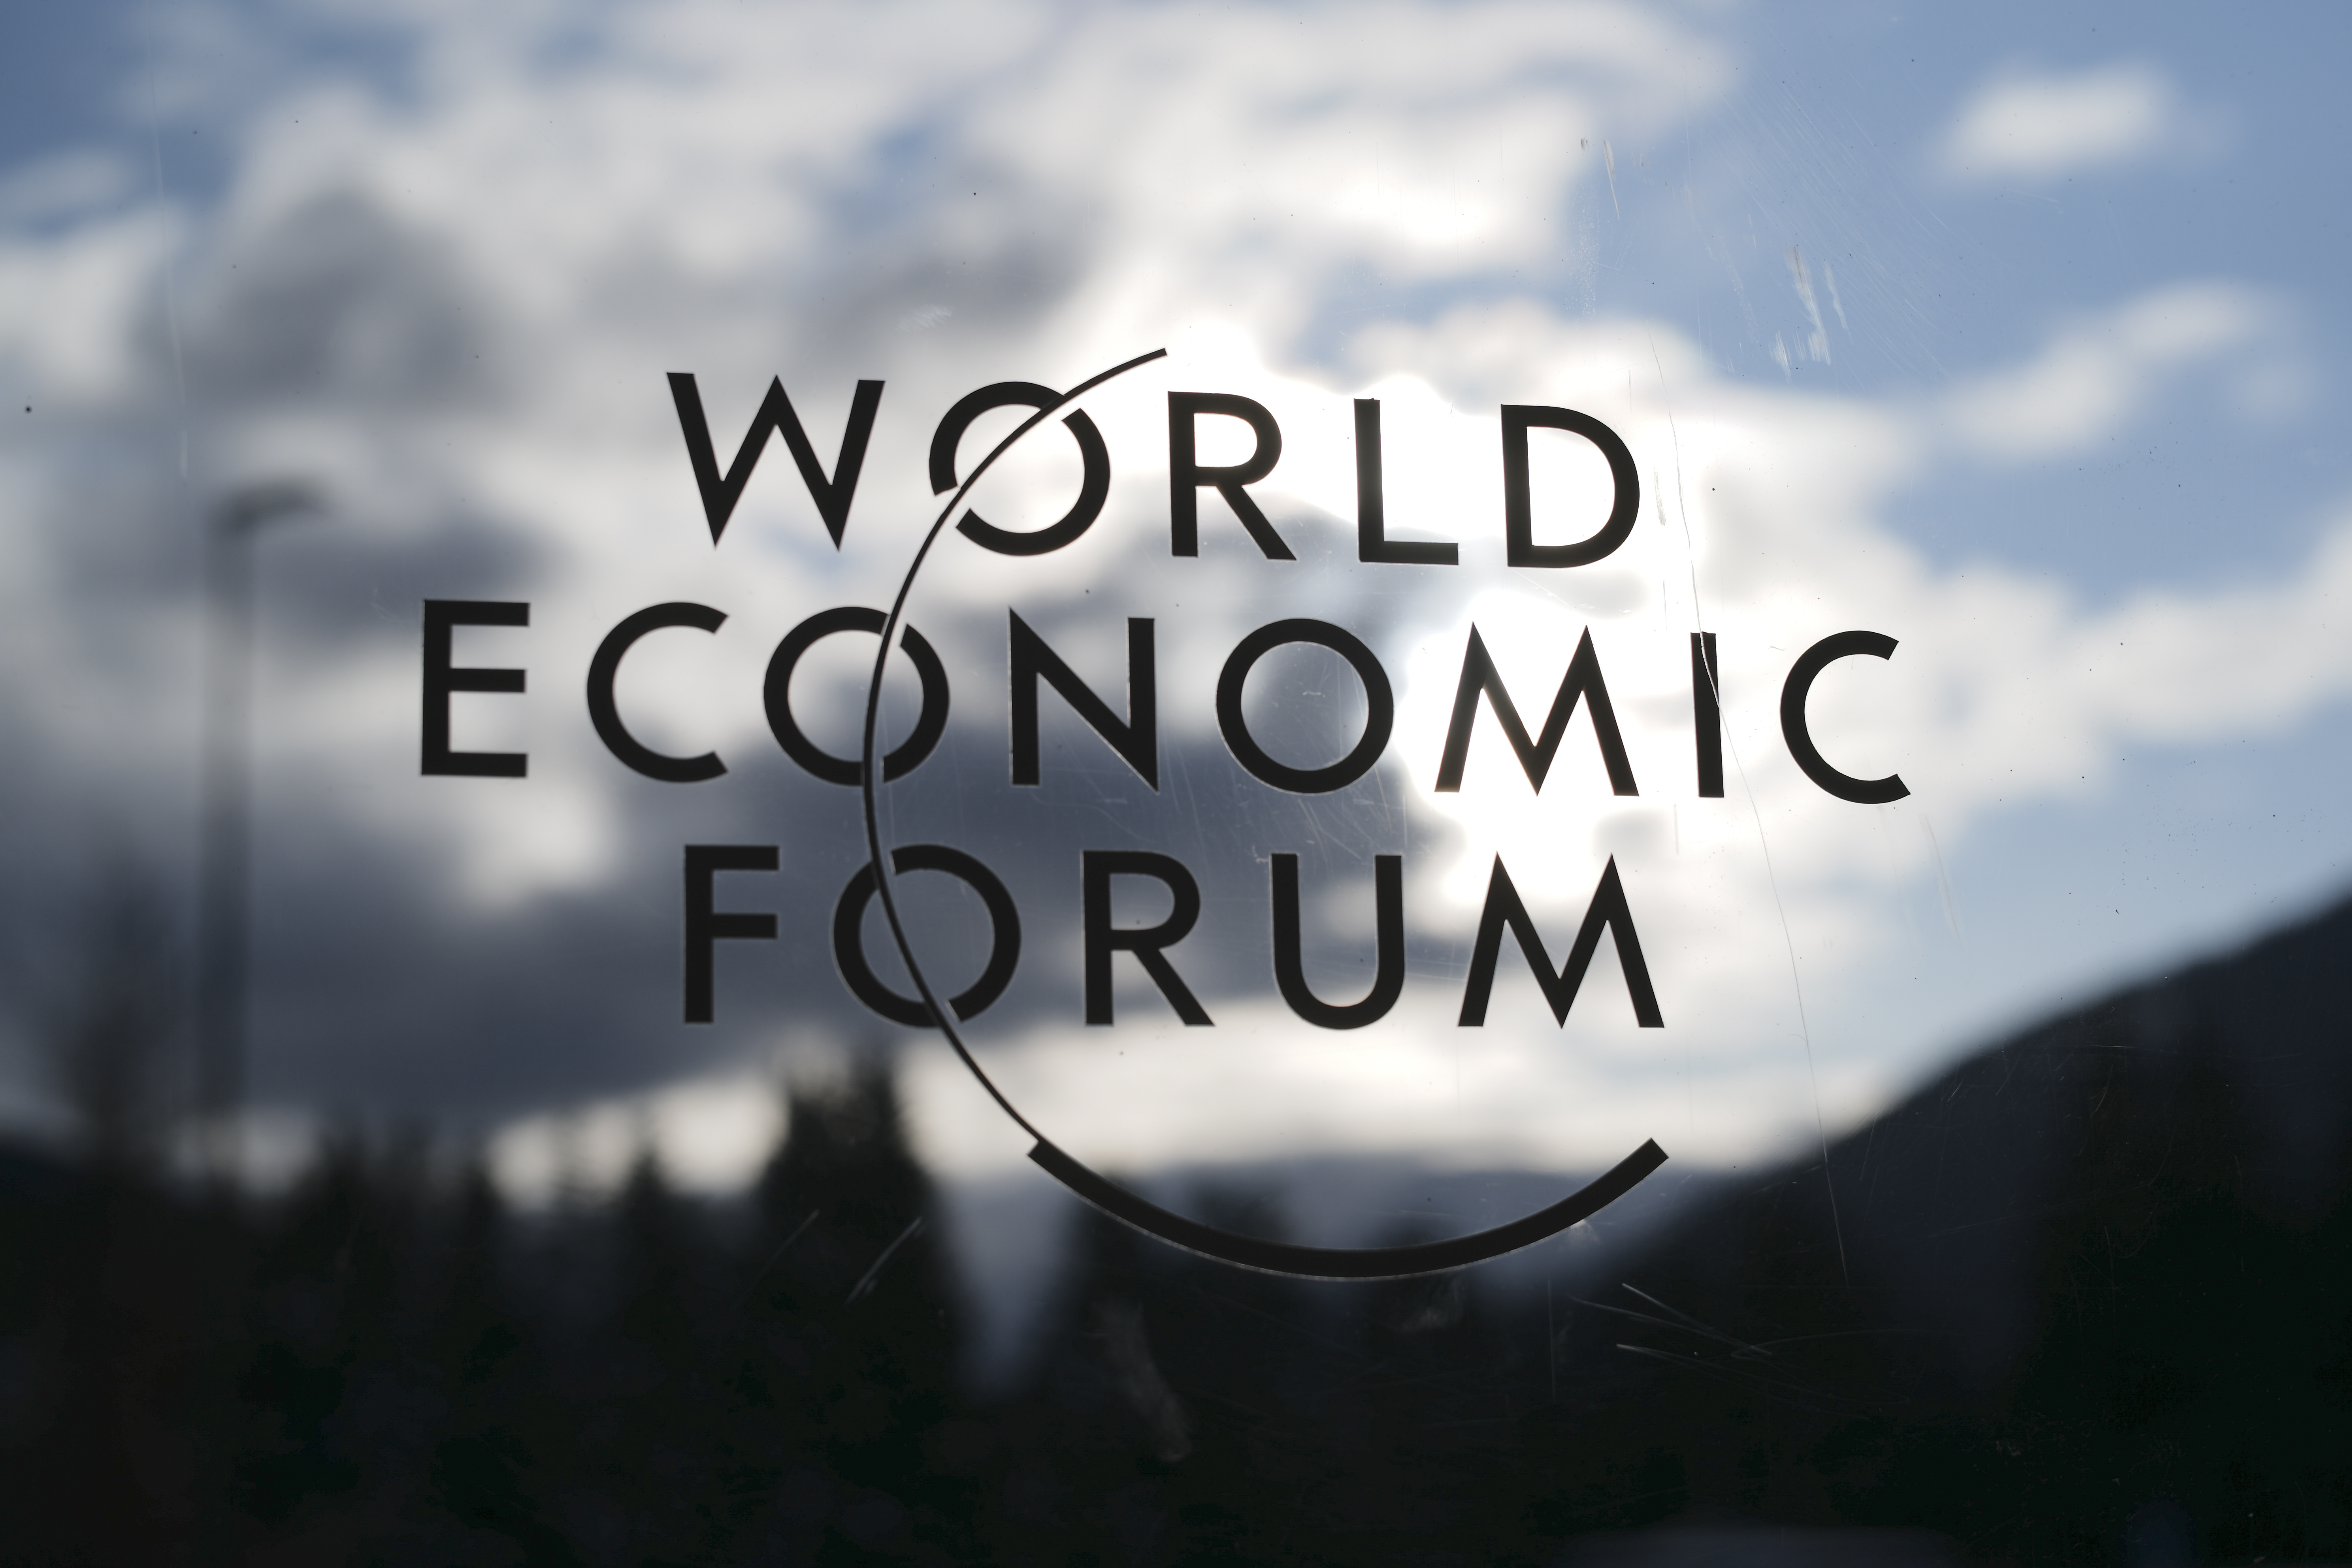 The logo of the World Economy Forum is displayed on a door at the Congress Centre in Davos, Switzerland, Sunday, Jan. 19, 2020. The 50th annual meeting of the World Economic Forum will take place in Davos from Jan. 20 until Jan. 24, 2020. (Photo/Markus Schreiber)